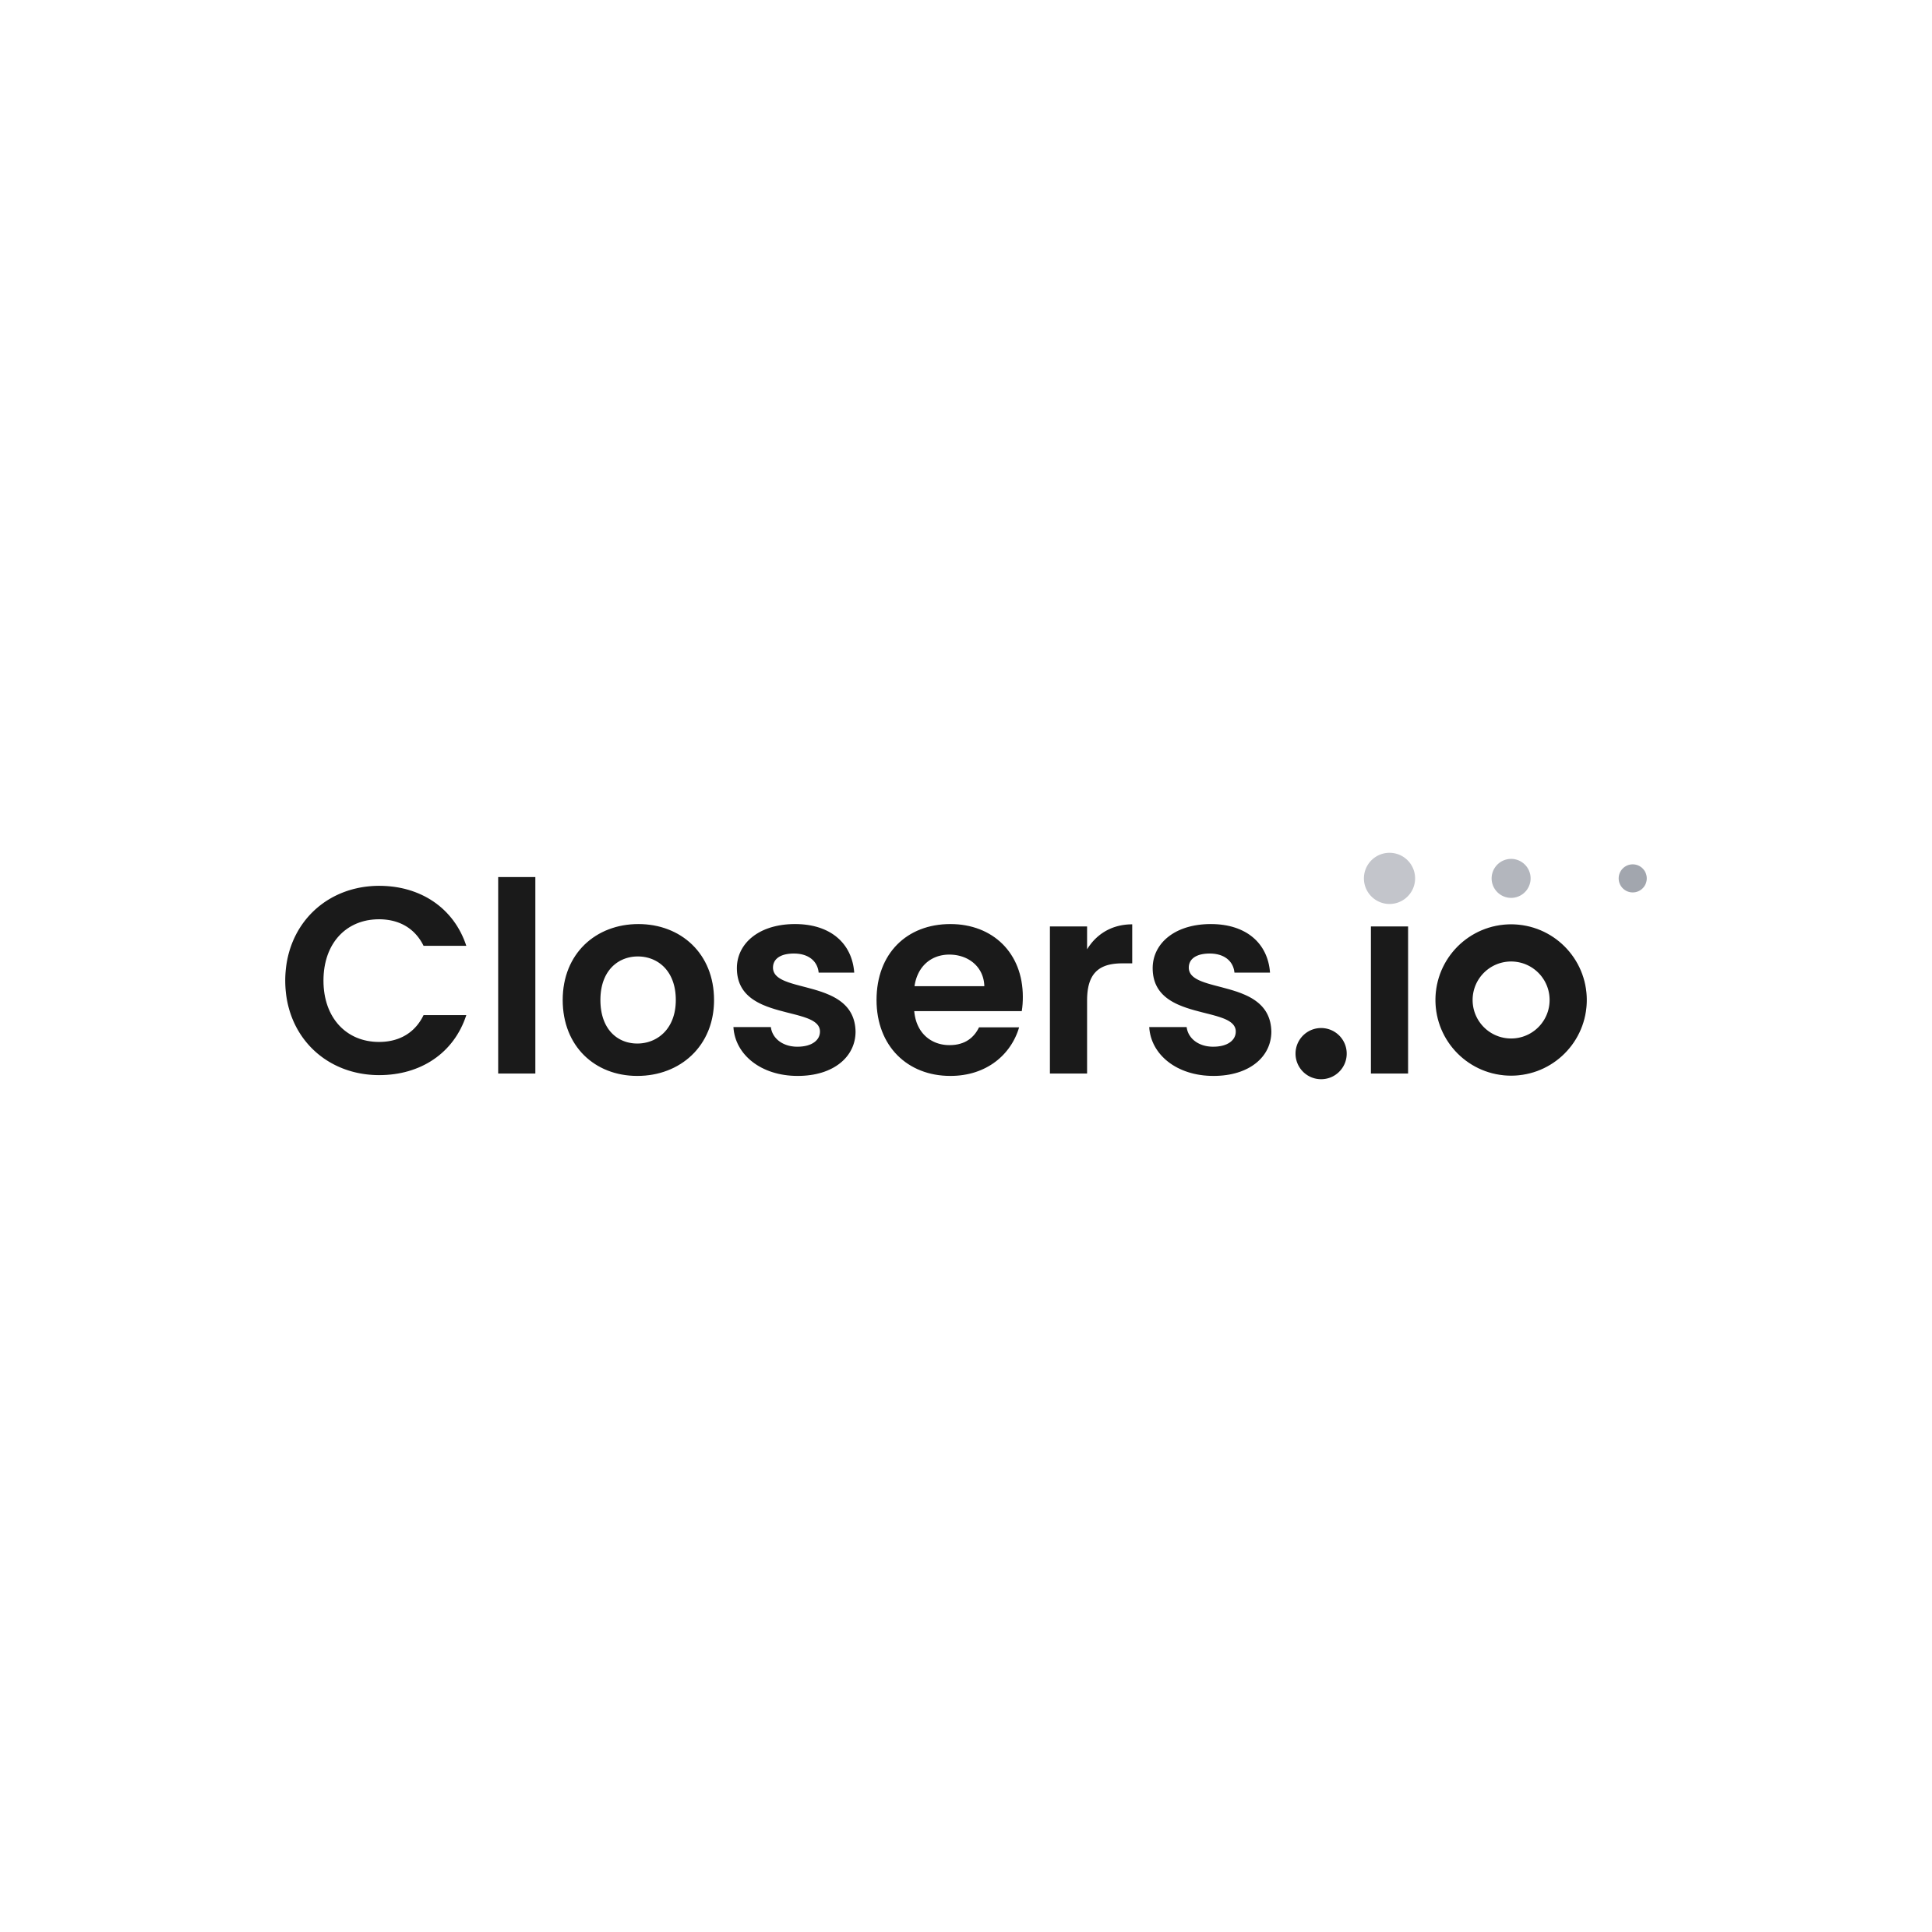 Closers.io Announces the Hiring of 3,000 New Sales Reps in Addition to the Growing 10K+ to Have Already Been Trained